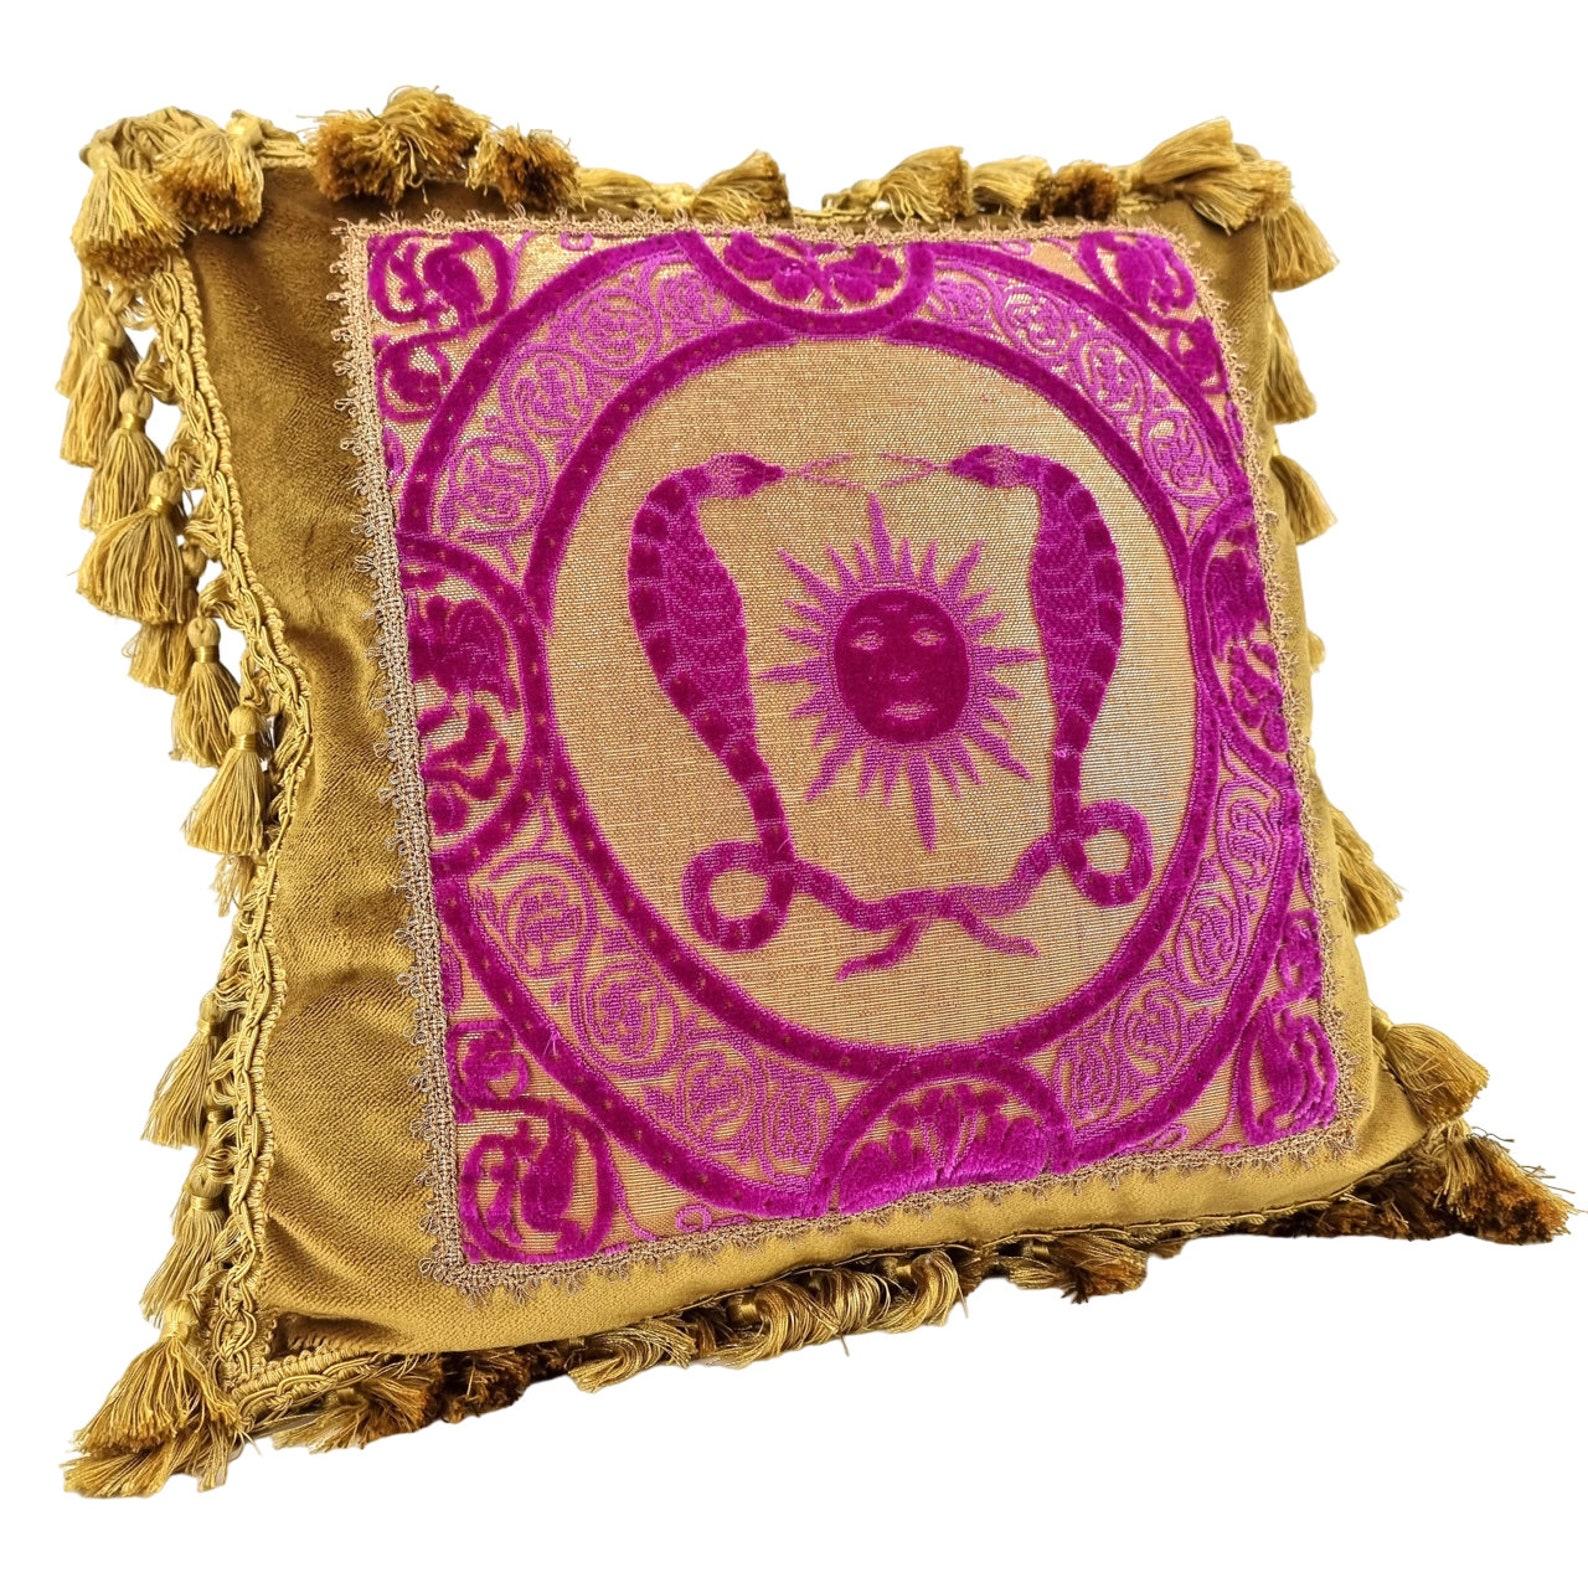 This amazing luxury pillow with gold tassel trim all around the four edges is handmade using Rubelli velvet in antique gold color embellished with front positioned panel in Luigi Bevilacqua fuchsia silk handmade velvet 